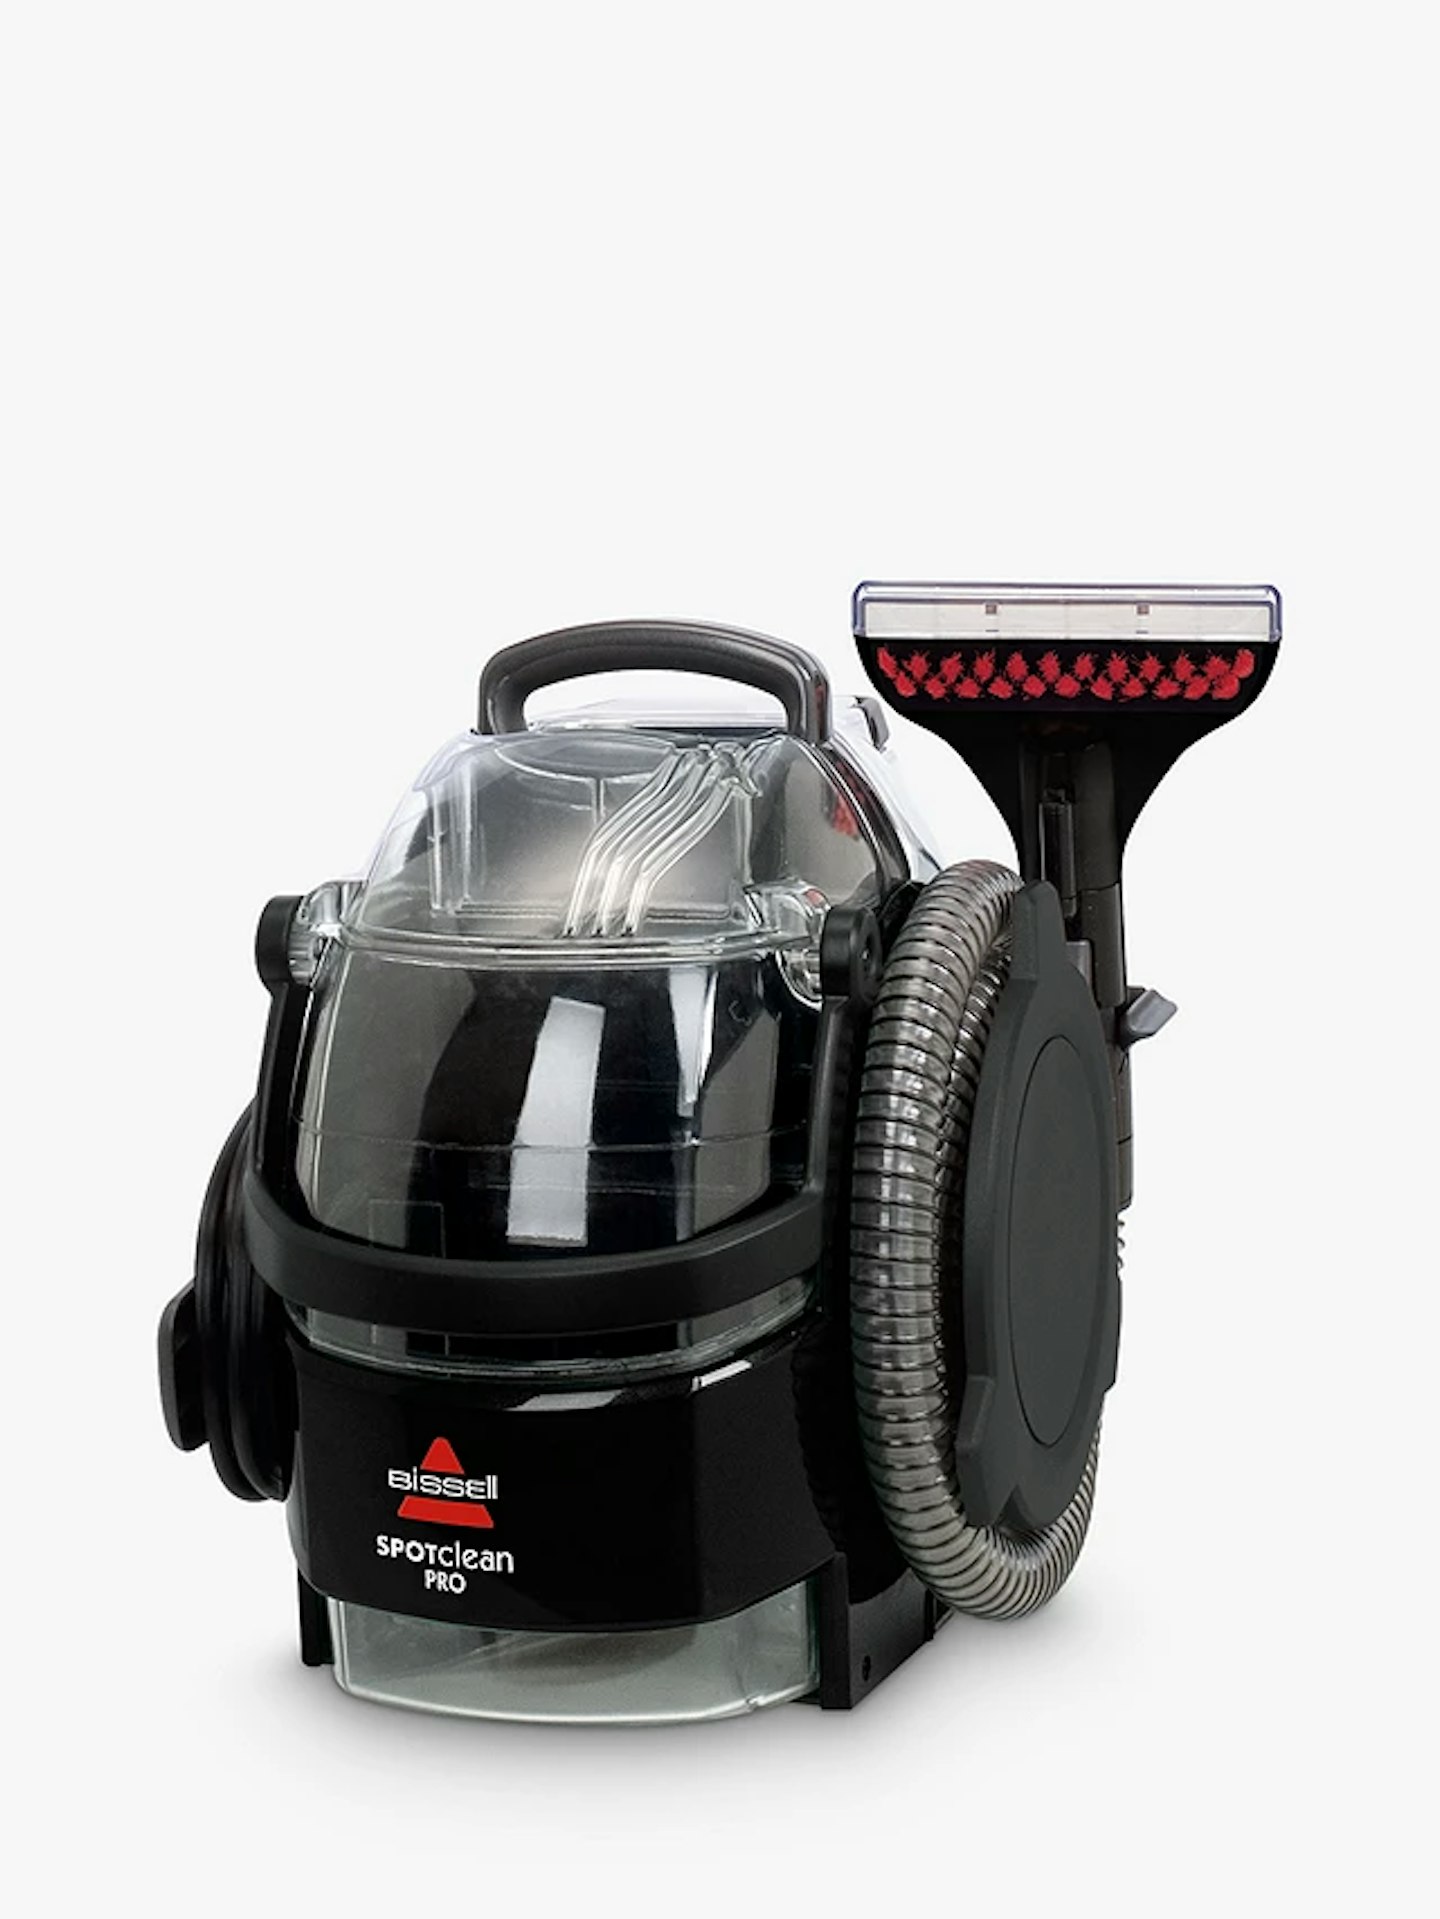 Best carpet cleaner Bissell SpotClean Pro Spot Cleaner